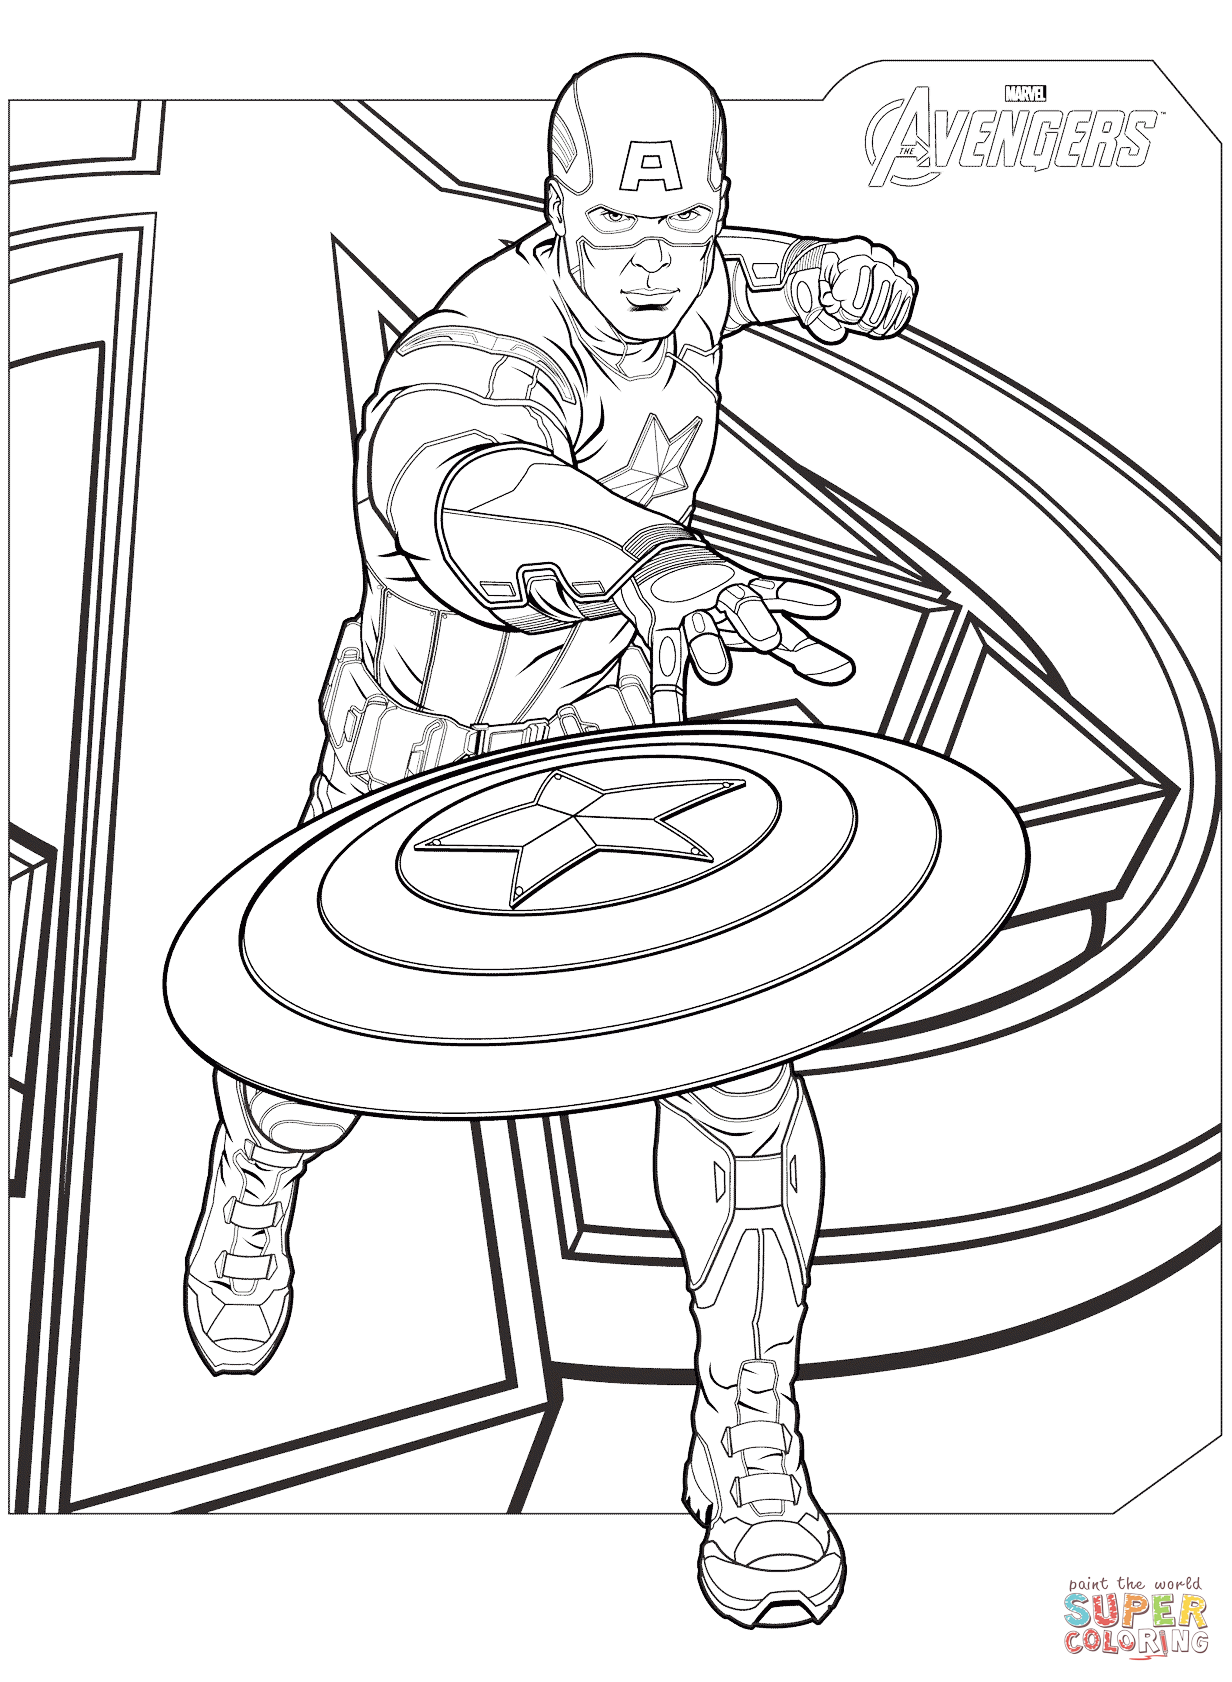 Avengers Captain America coloring page | Free Printable Coloring Pages